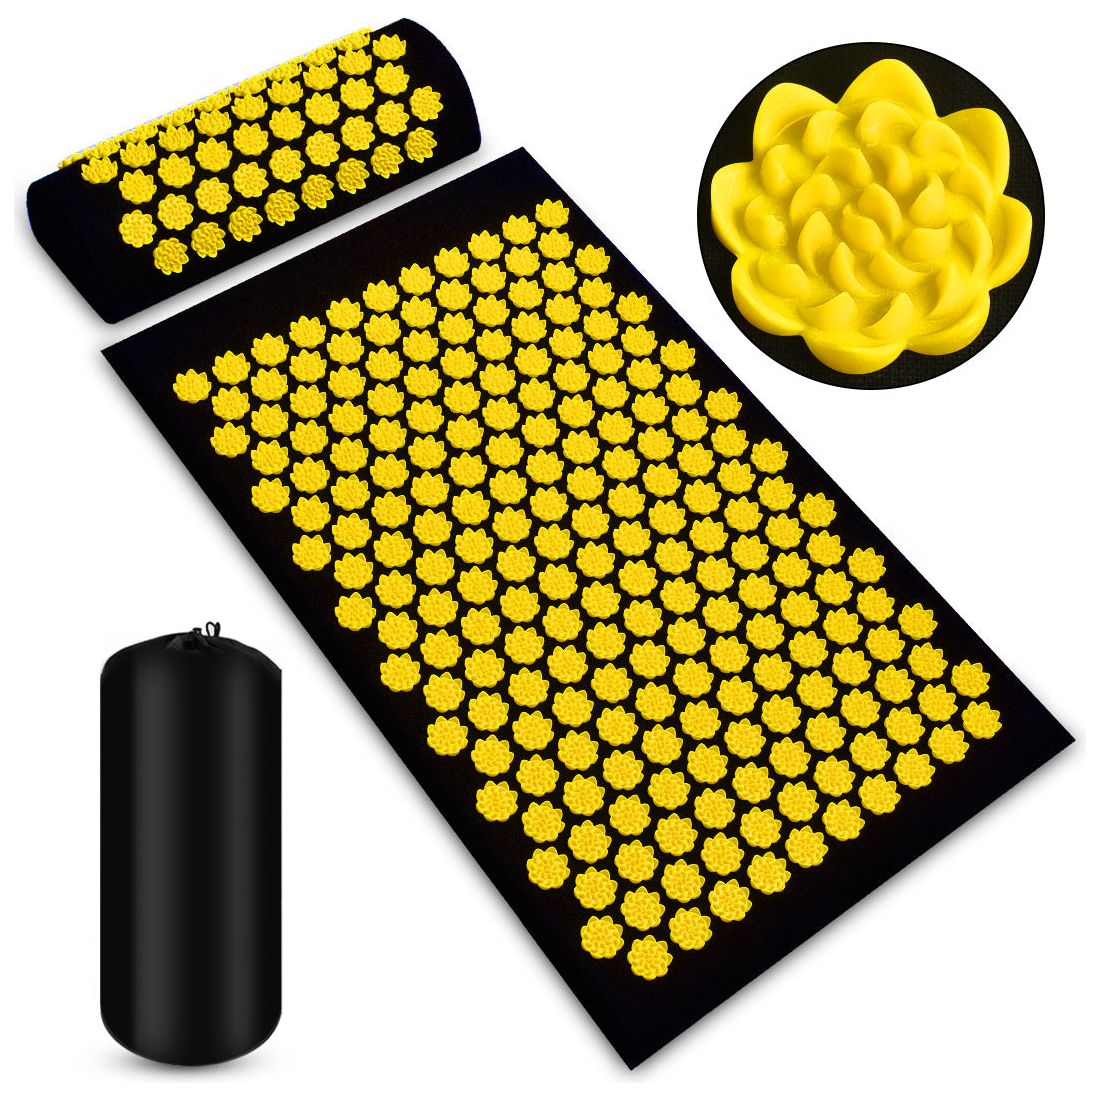 Acupressure Needles Massage Mat With Pillow Set For Back/Neck Pain Relief.